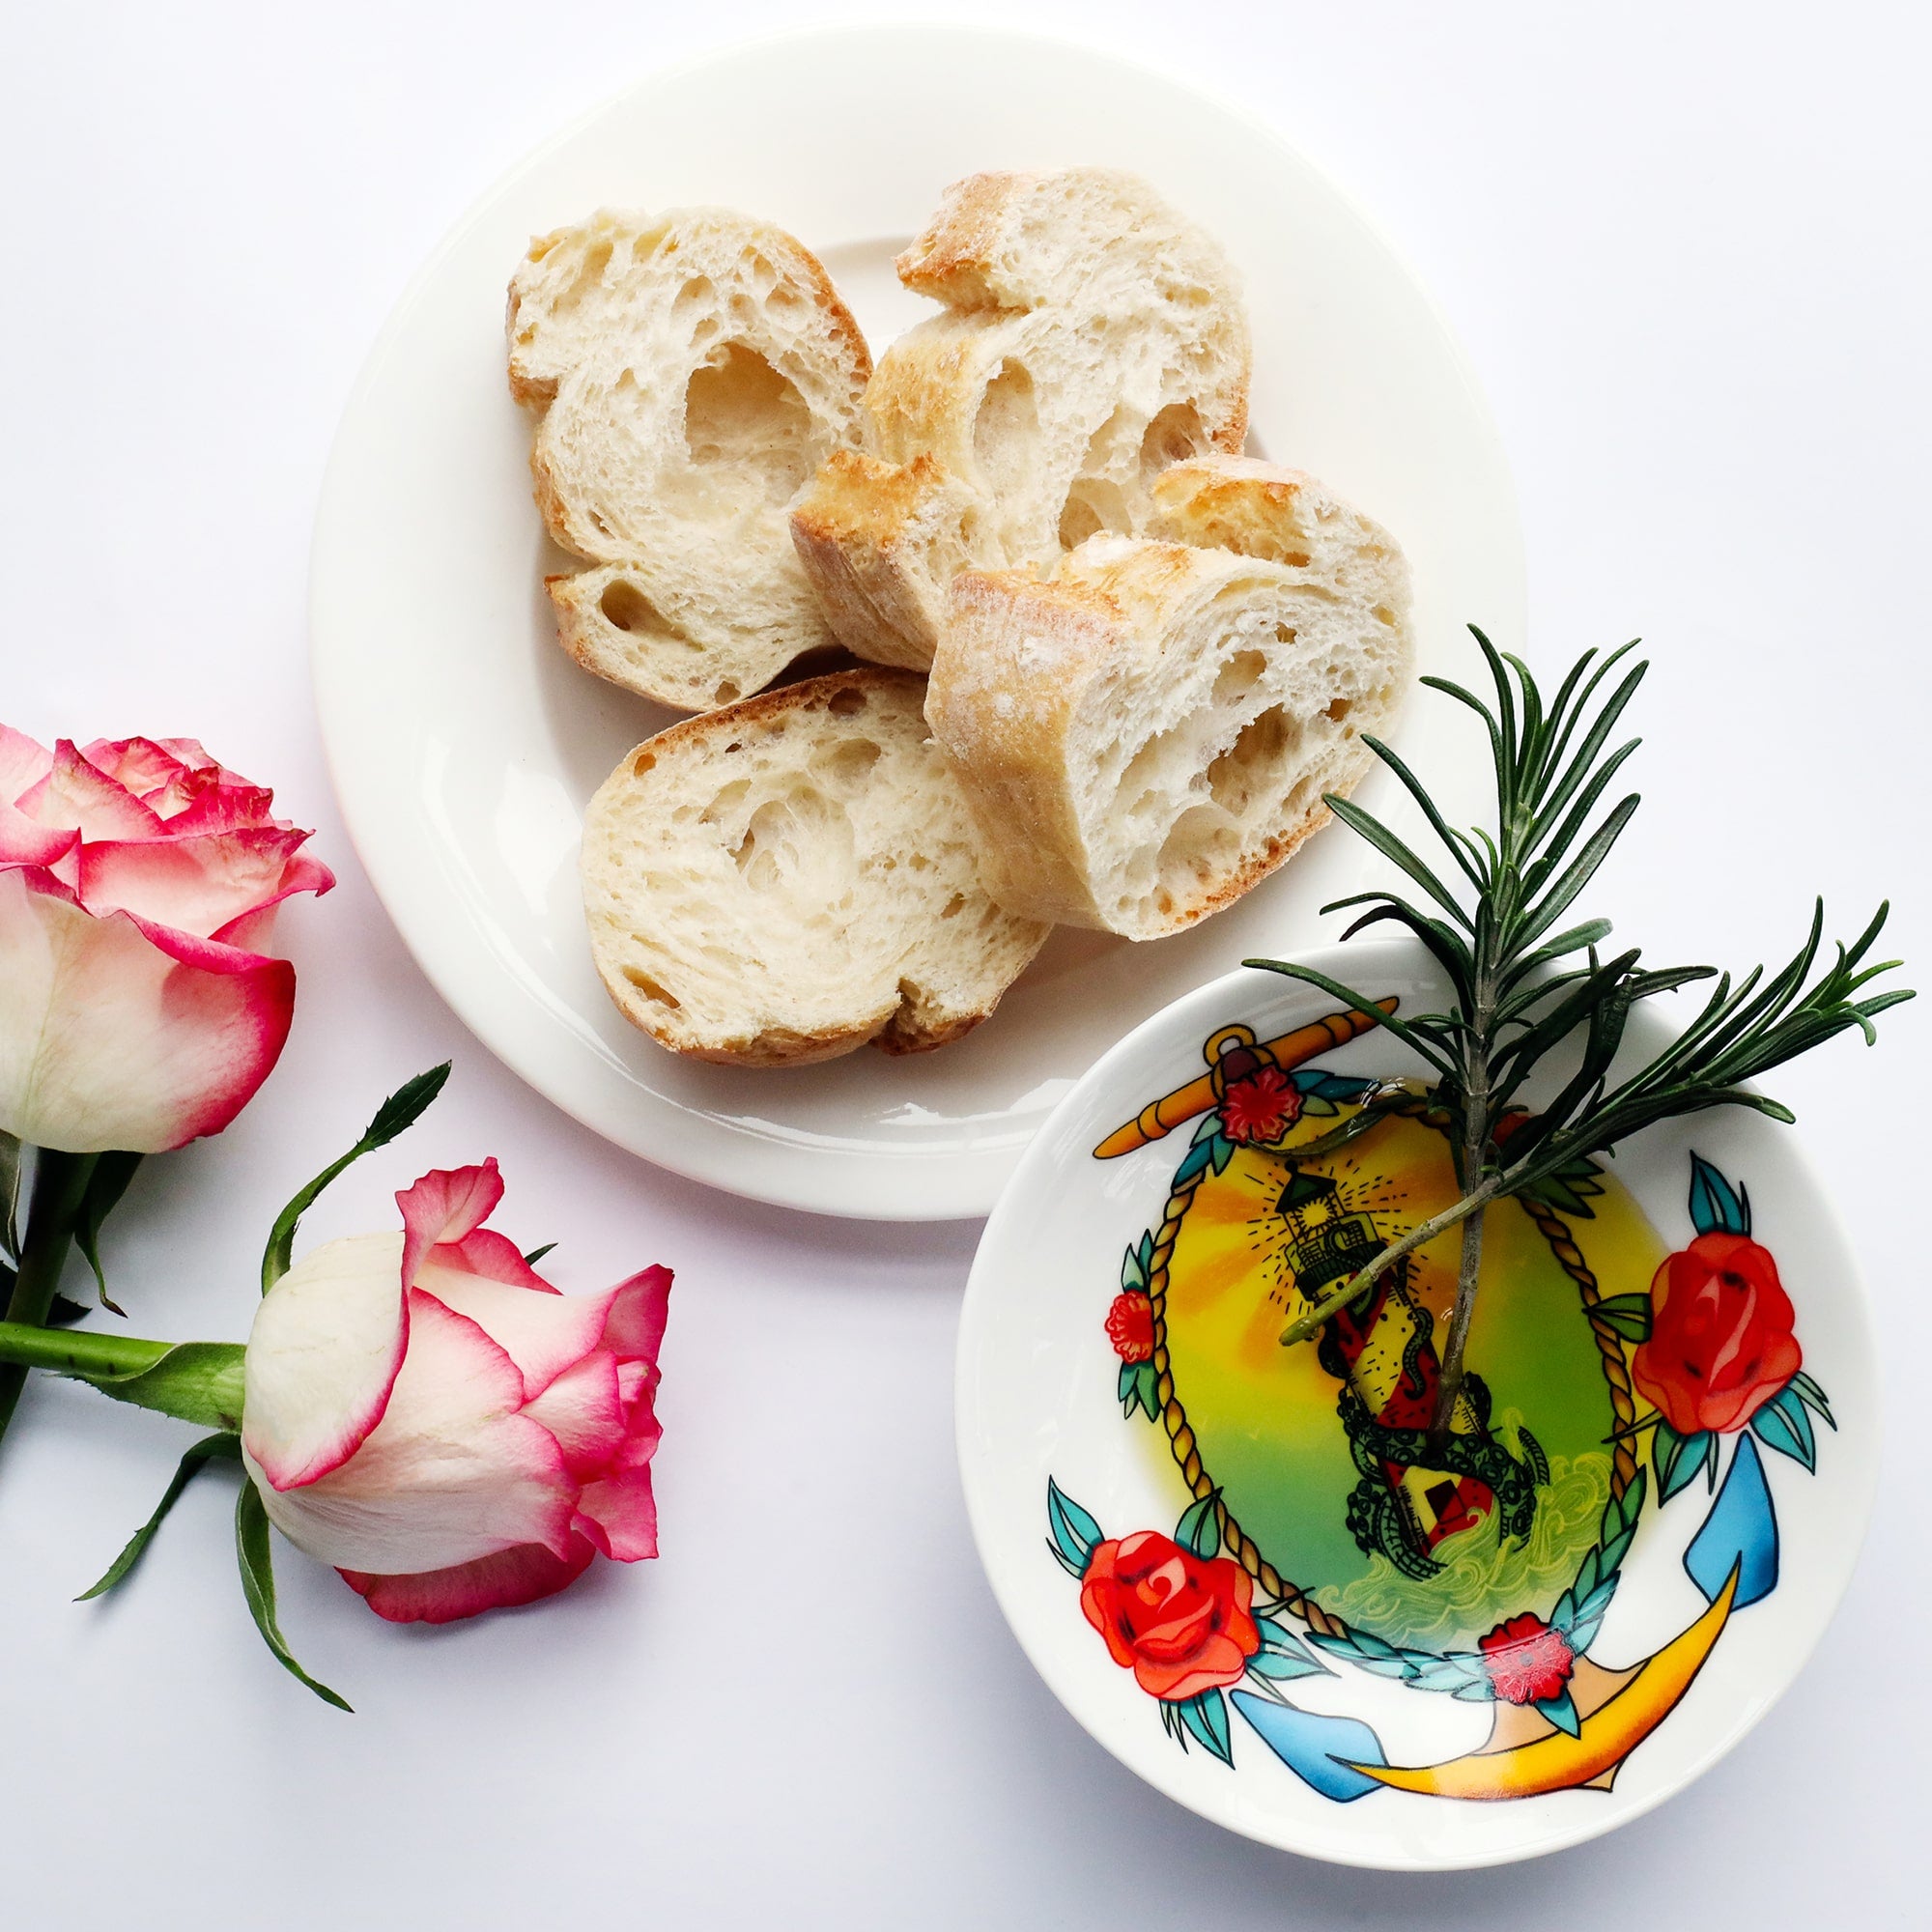 Nibbles dish with lighthouse, kraken, rose and anchor design in a tattoo style. the dish has olive oil and rosemary in it and there is a plate of bread cut to the side as well as 2 pink and white roses.